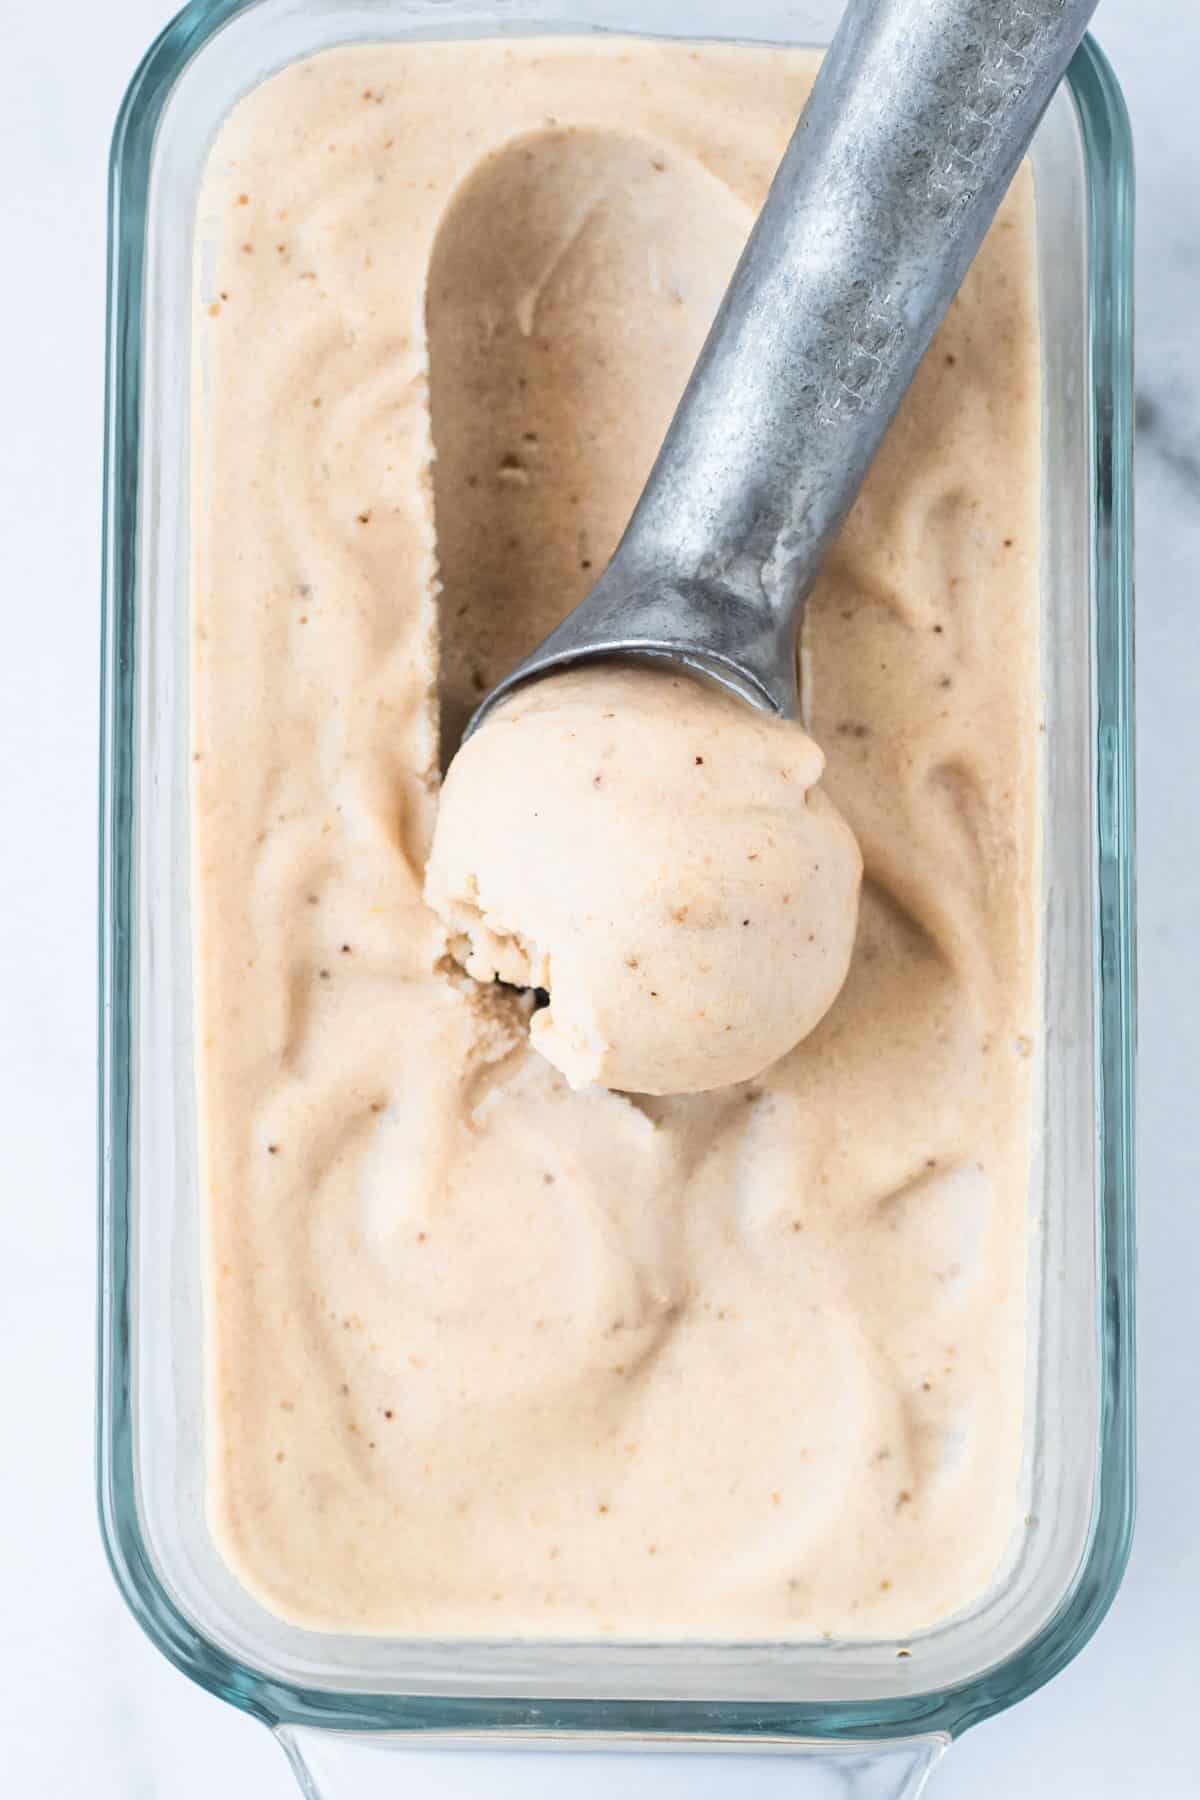 A scoop of banana nice cream in a glass container.